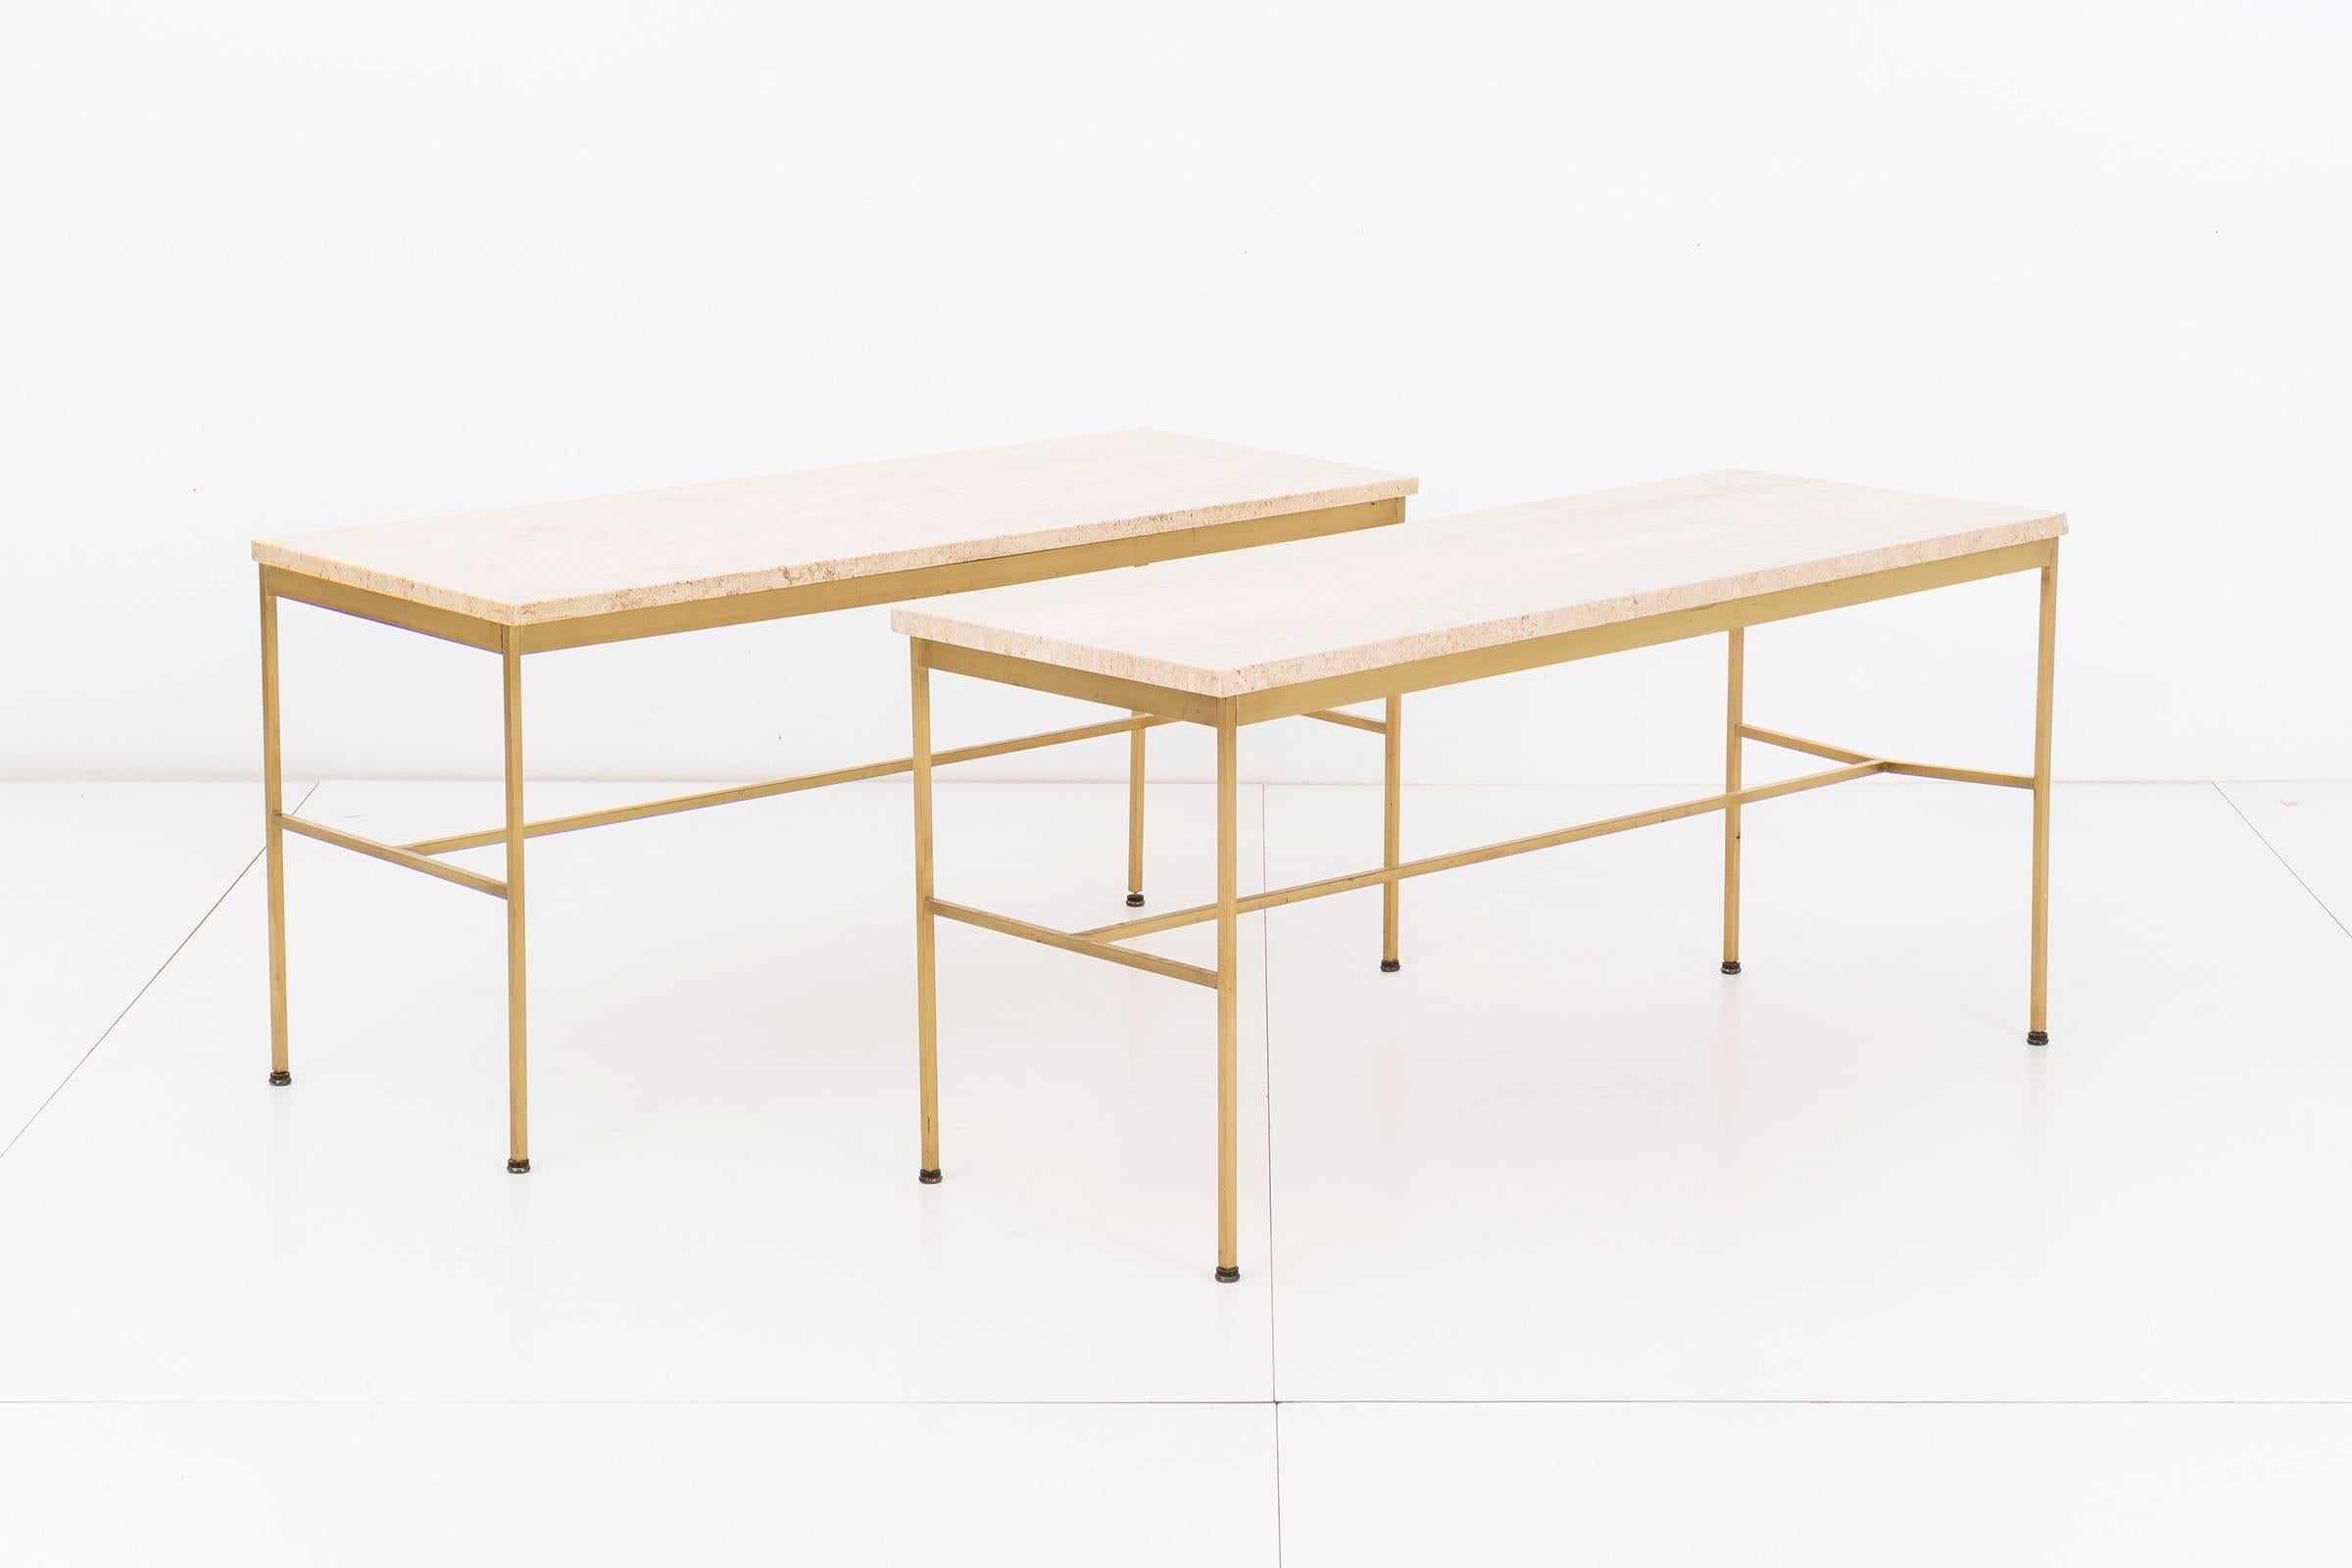 Paul McCobb for Directional. Pair of model 8704 console tables. Square tubular brass frames with travertine top. Patina on brass consistent with age and use. Stool sold separately.